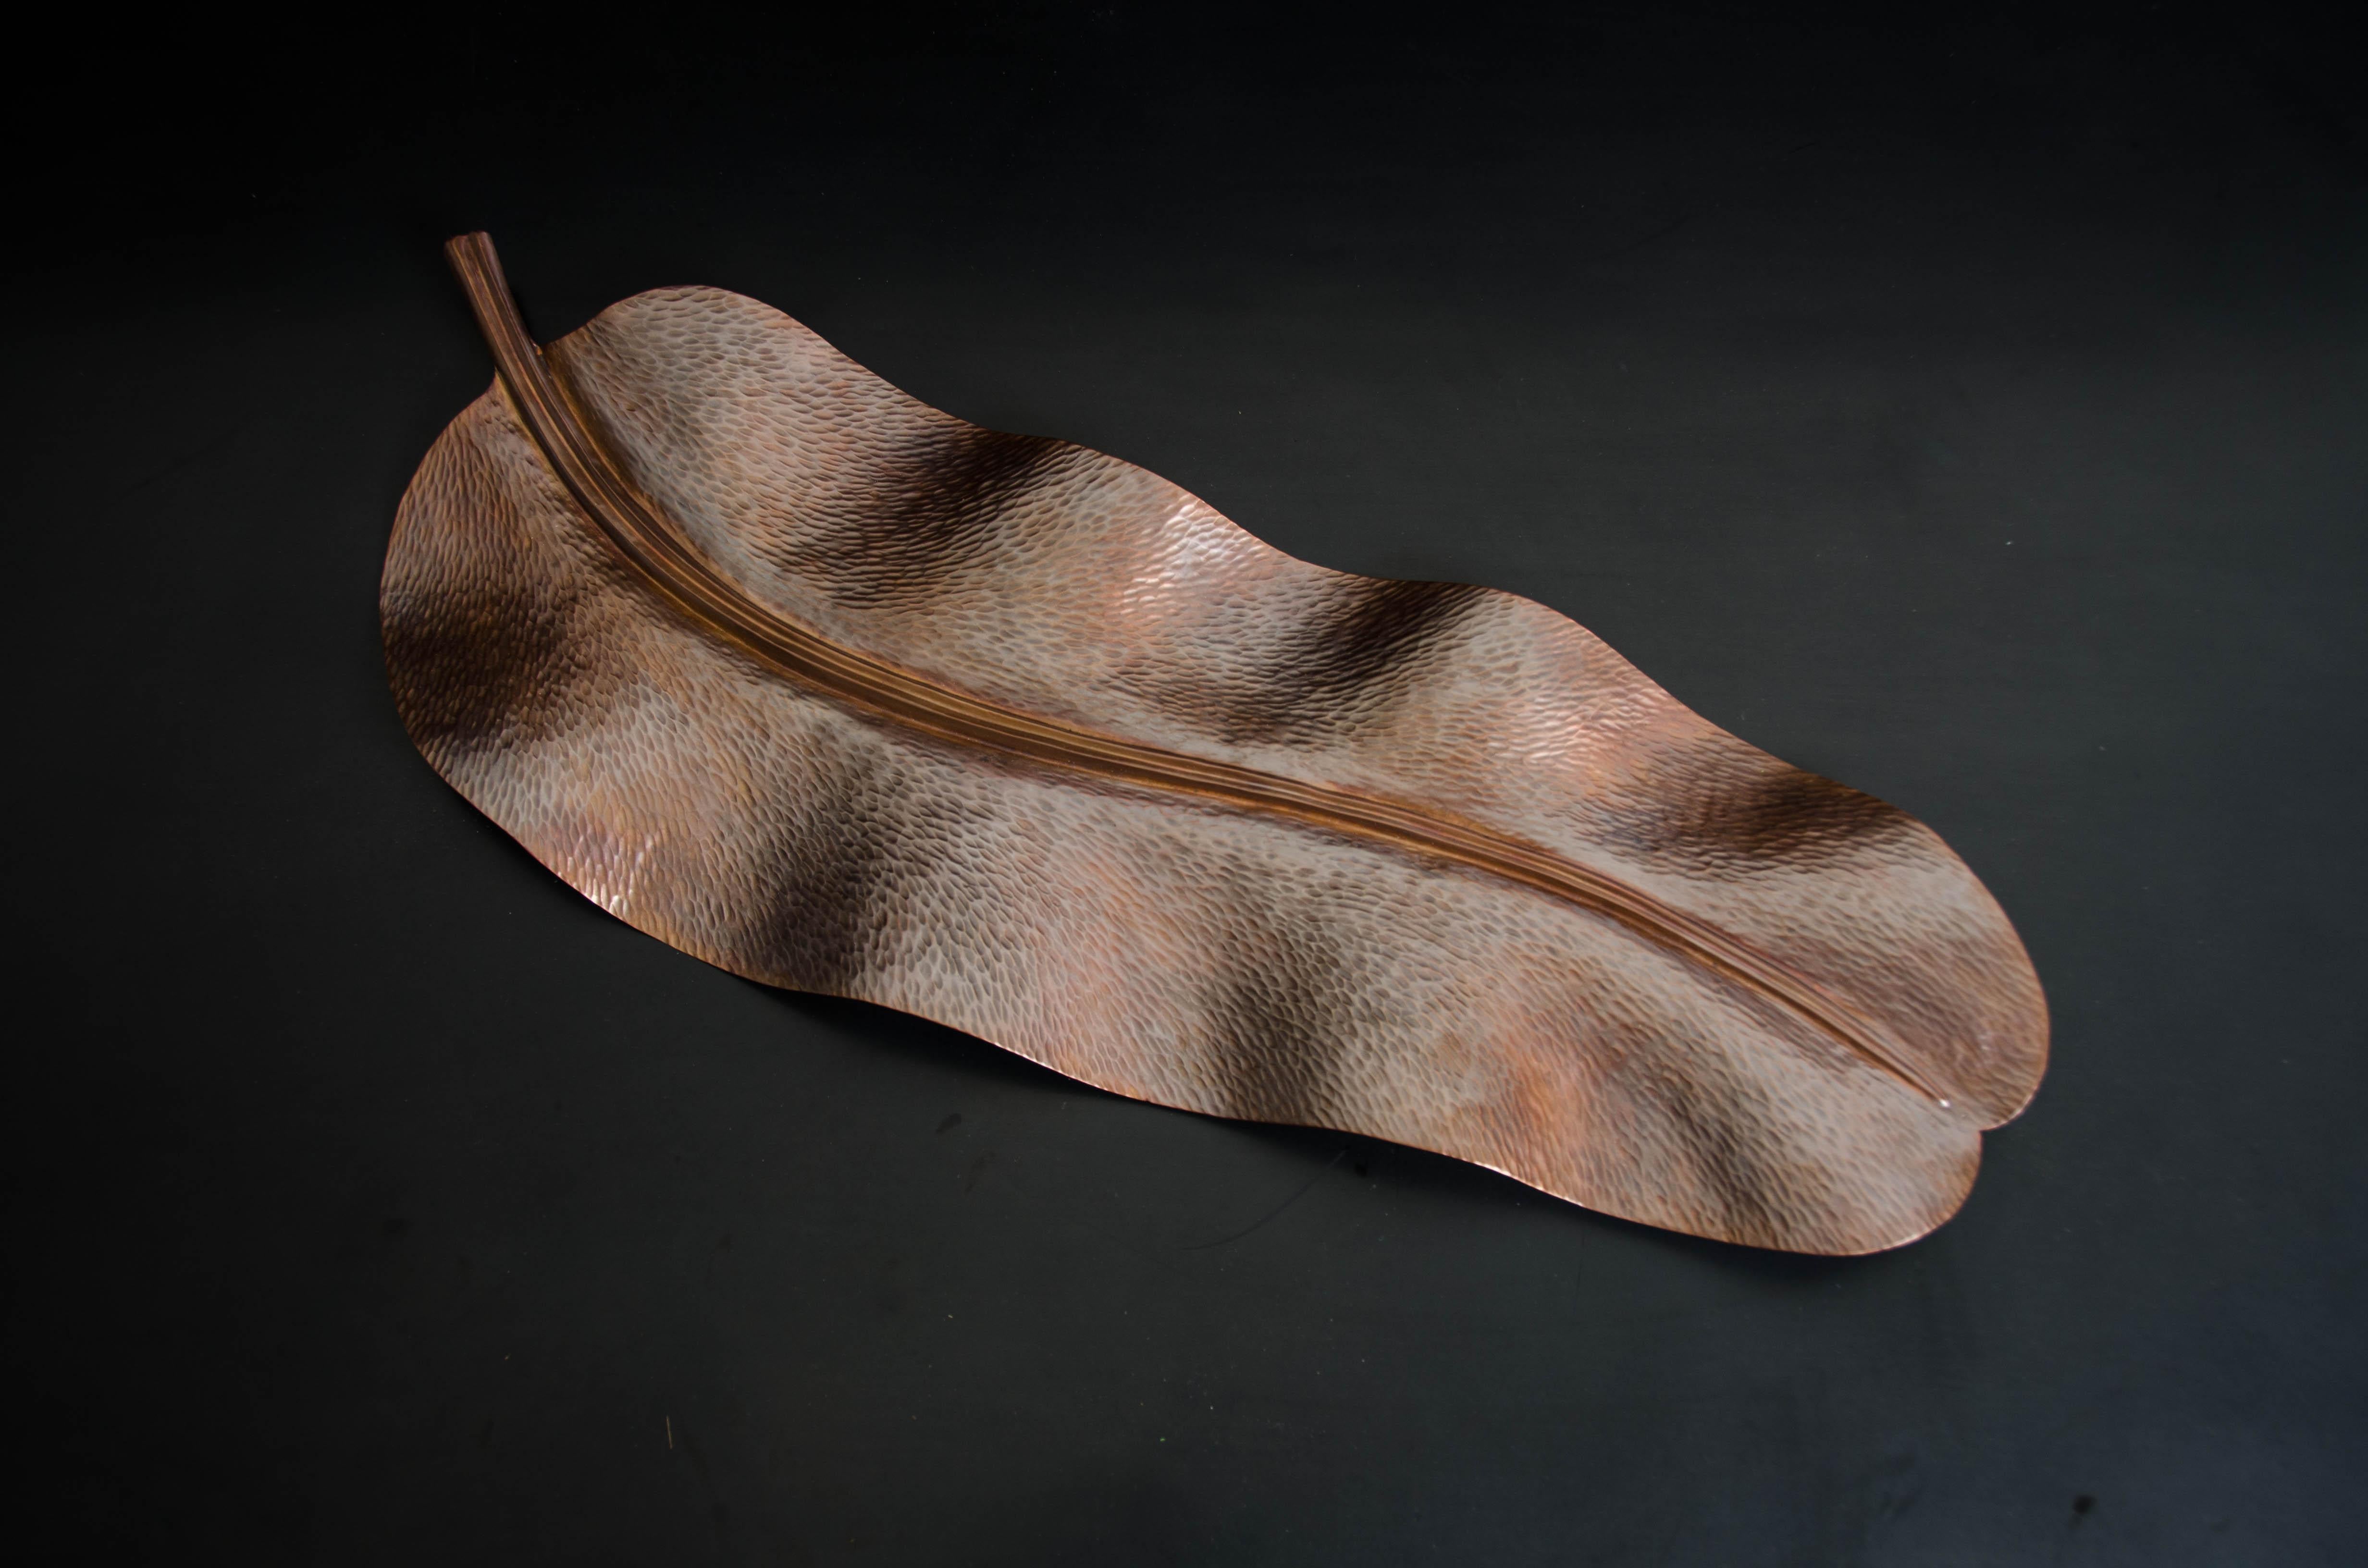 Banana leaf
Antique copper
Hand repousse
Limited Edition
Each piece is individually crafted and is unique.

Repousse is the traditional art of hand-hammering decorative relief onto sheet metal. The technique originated around 800 BC between